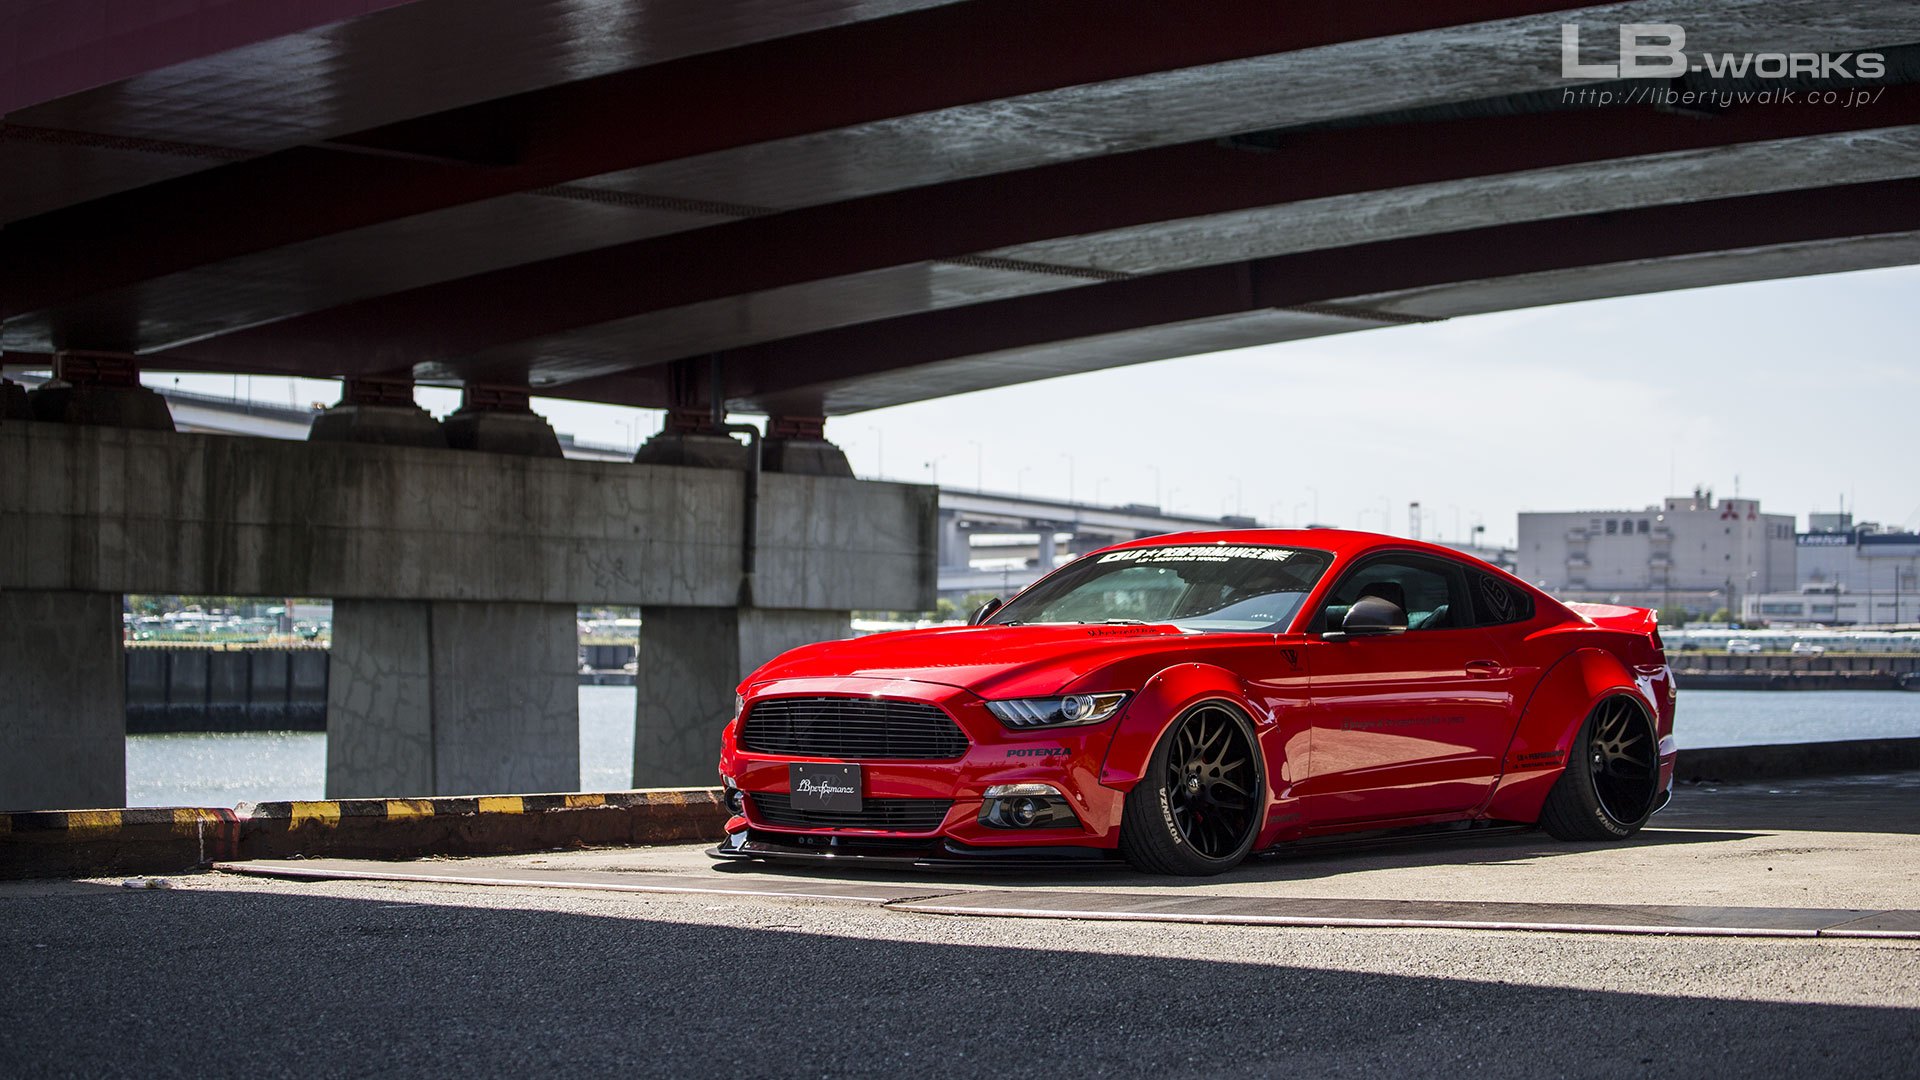 Liberty Walk Body Kit on Red Ford Mustang - Photo by LB Performance